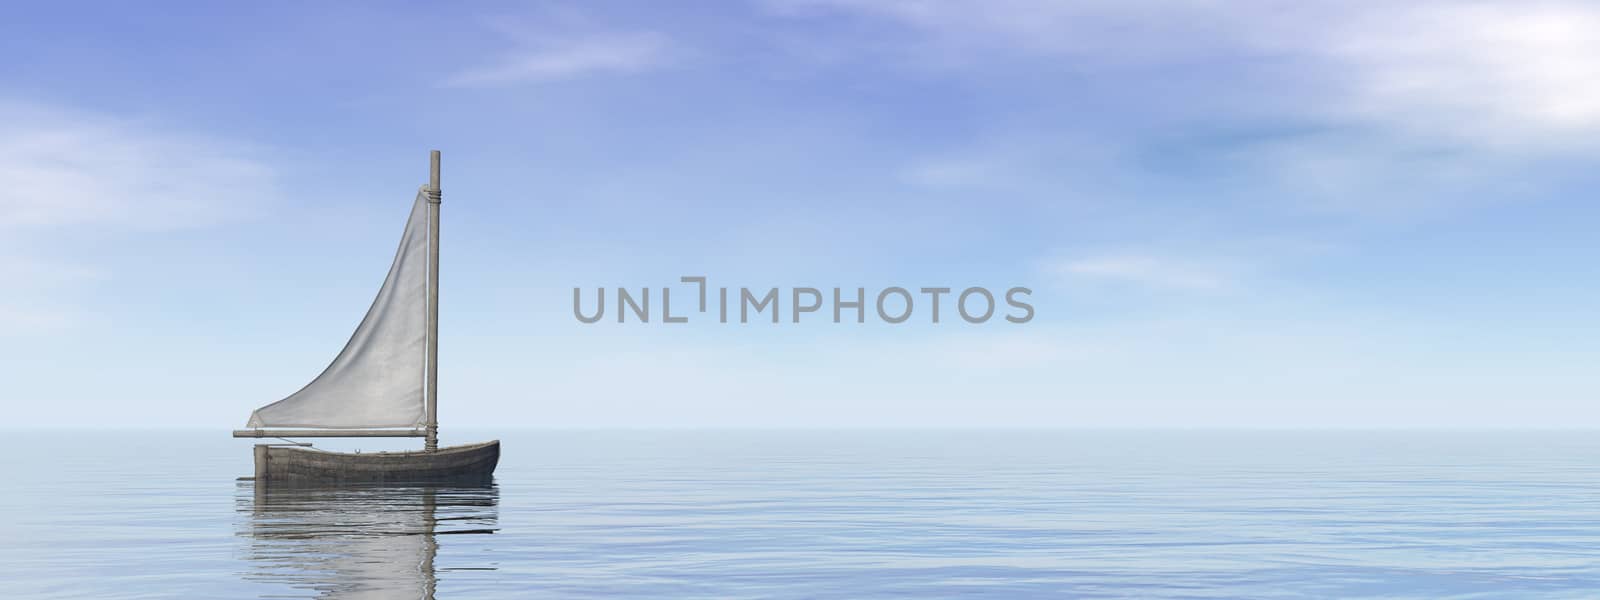 Small sailing boat on the ocean by day - 3D render